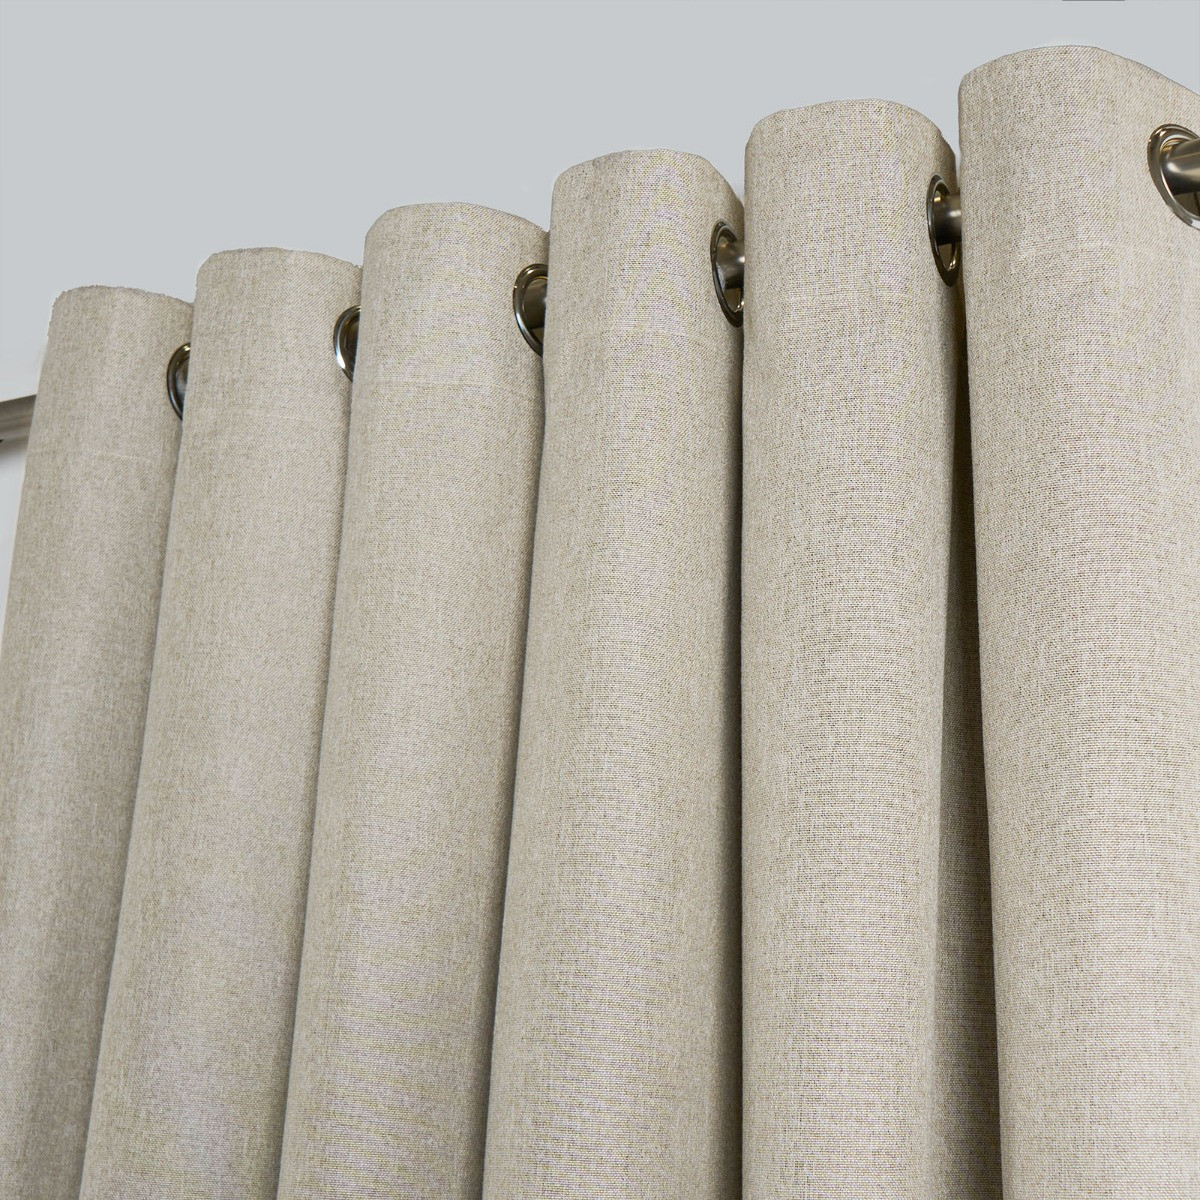 OHS Woven Texture Eyelet Ultra Blackout Curtains - Natural>